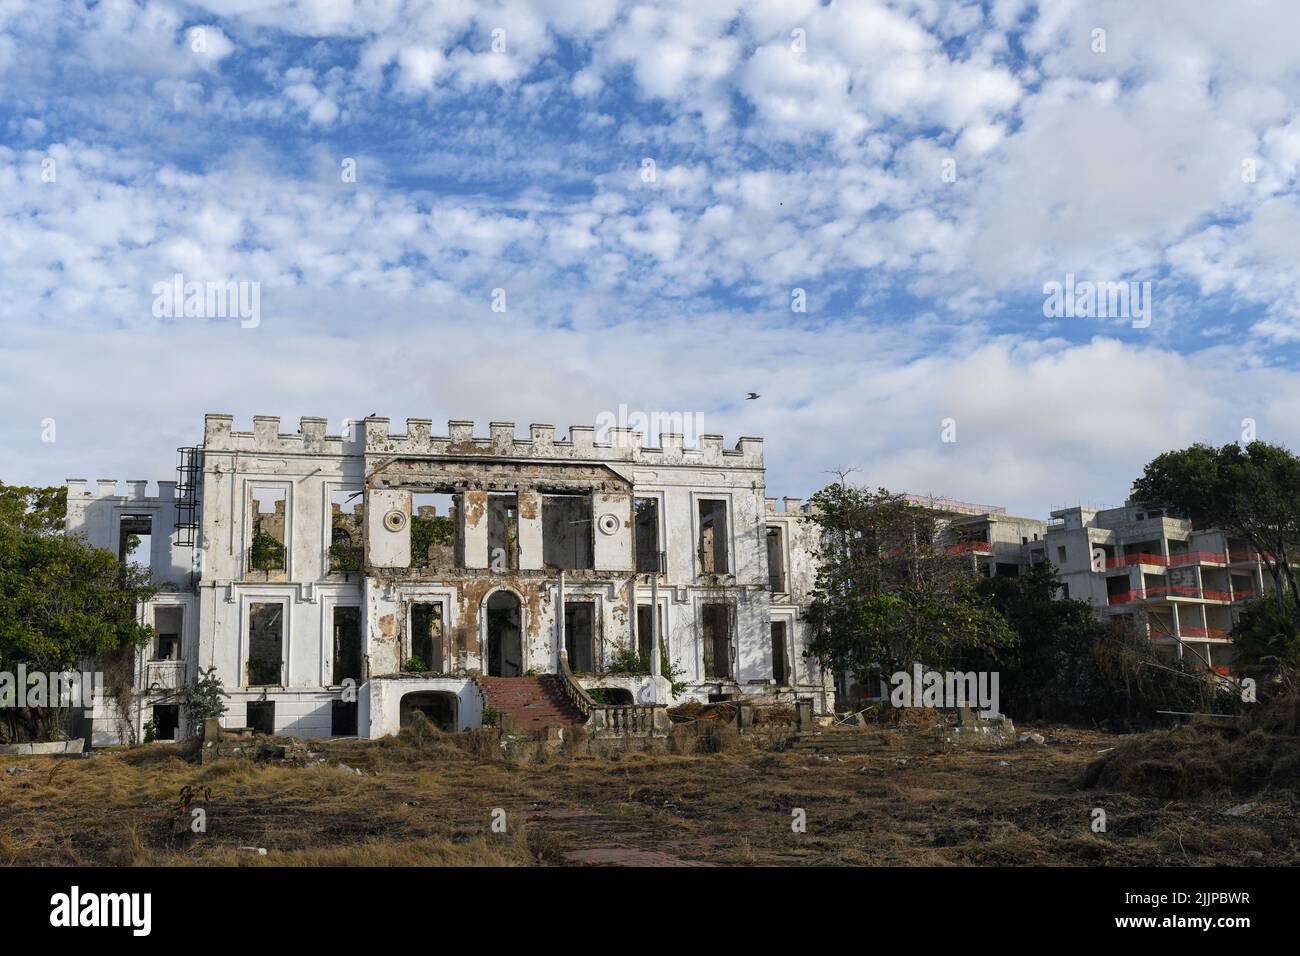 wide shot of historical architechure castle 'Samuel Hall Lord' Stock Photo